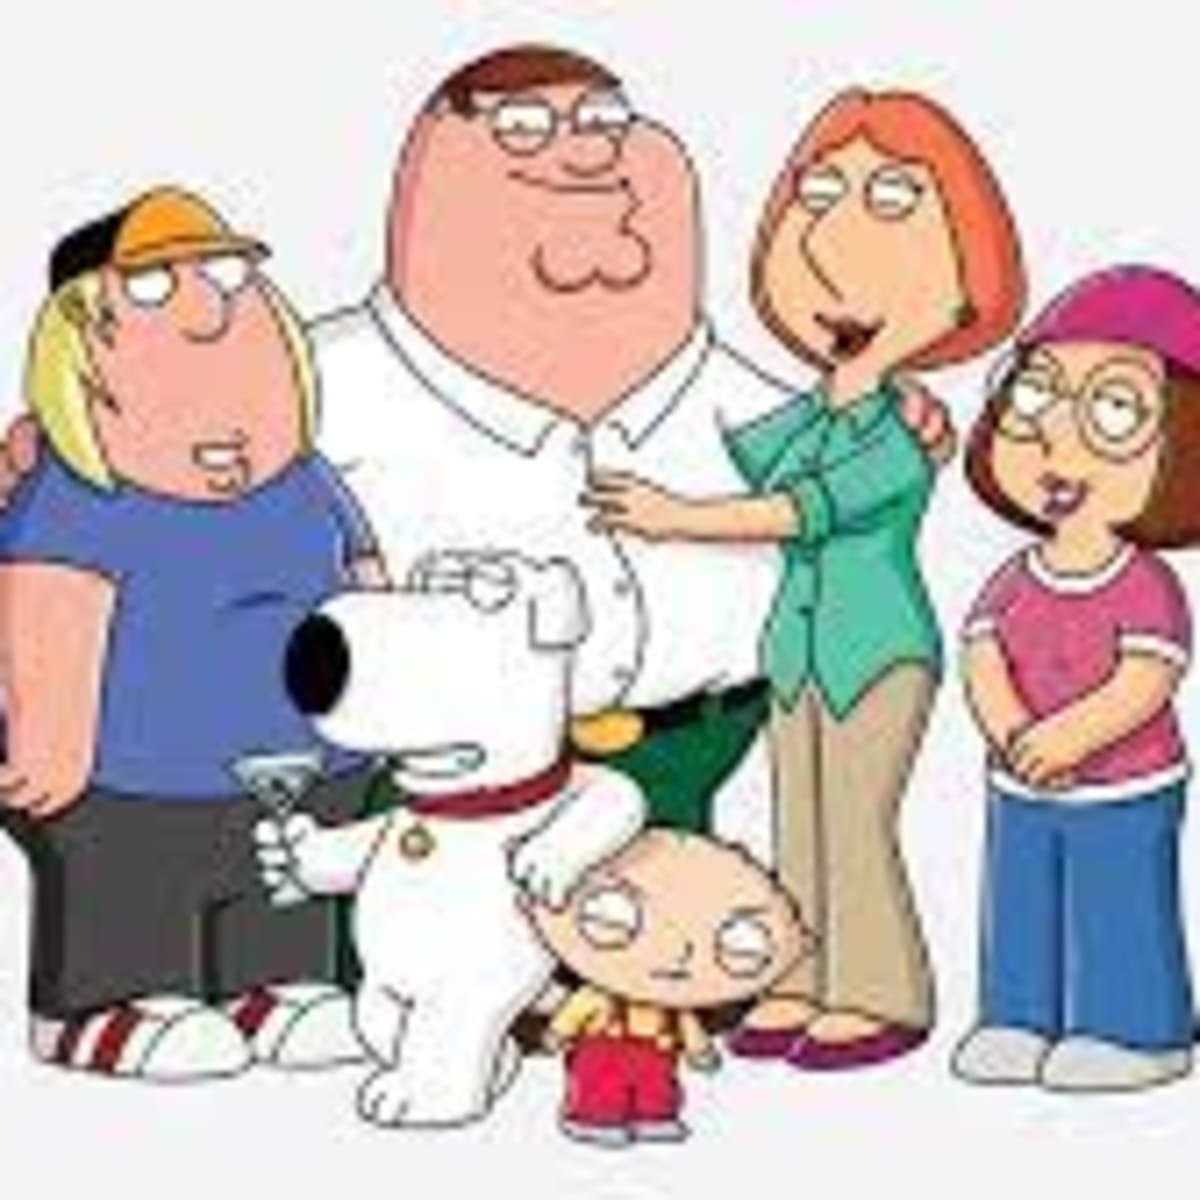 It's The Season For Playing Games - Family Guy Online